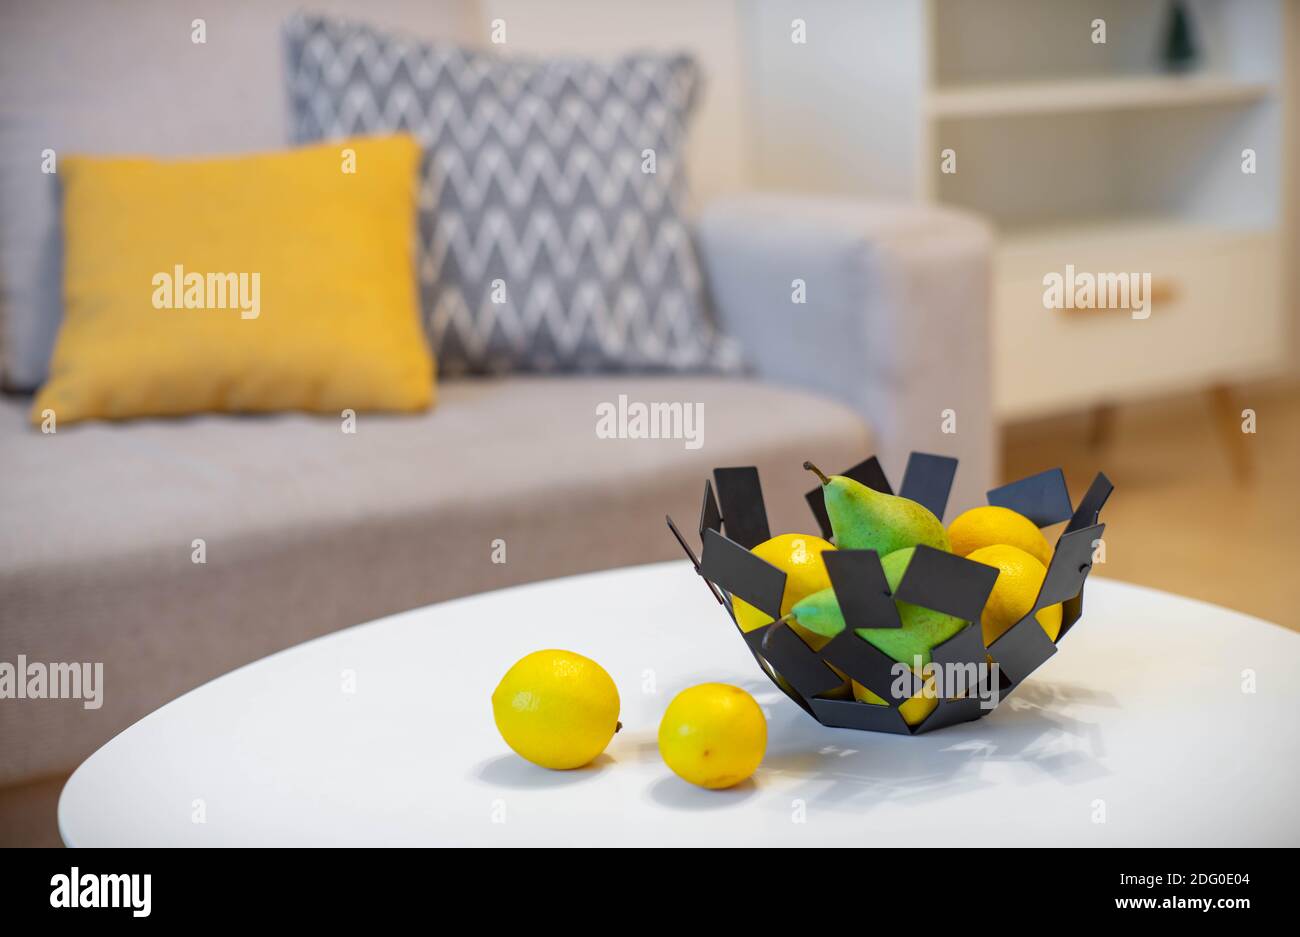 Close-up of decorative bowl with fruits on white table. Lemons and pears. Modern interior. Stock Photo